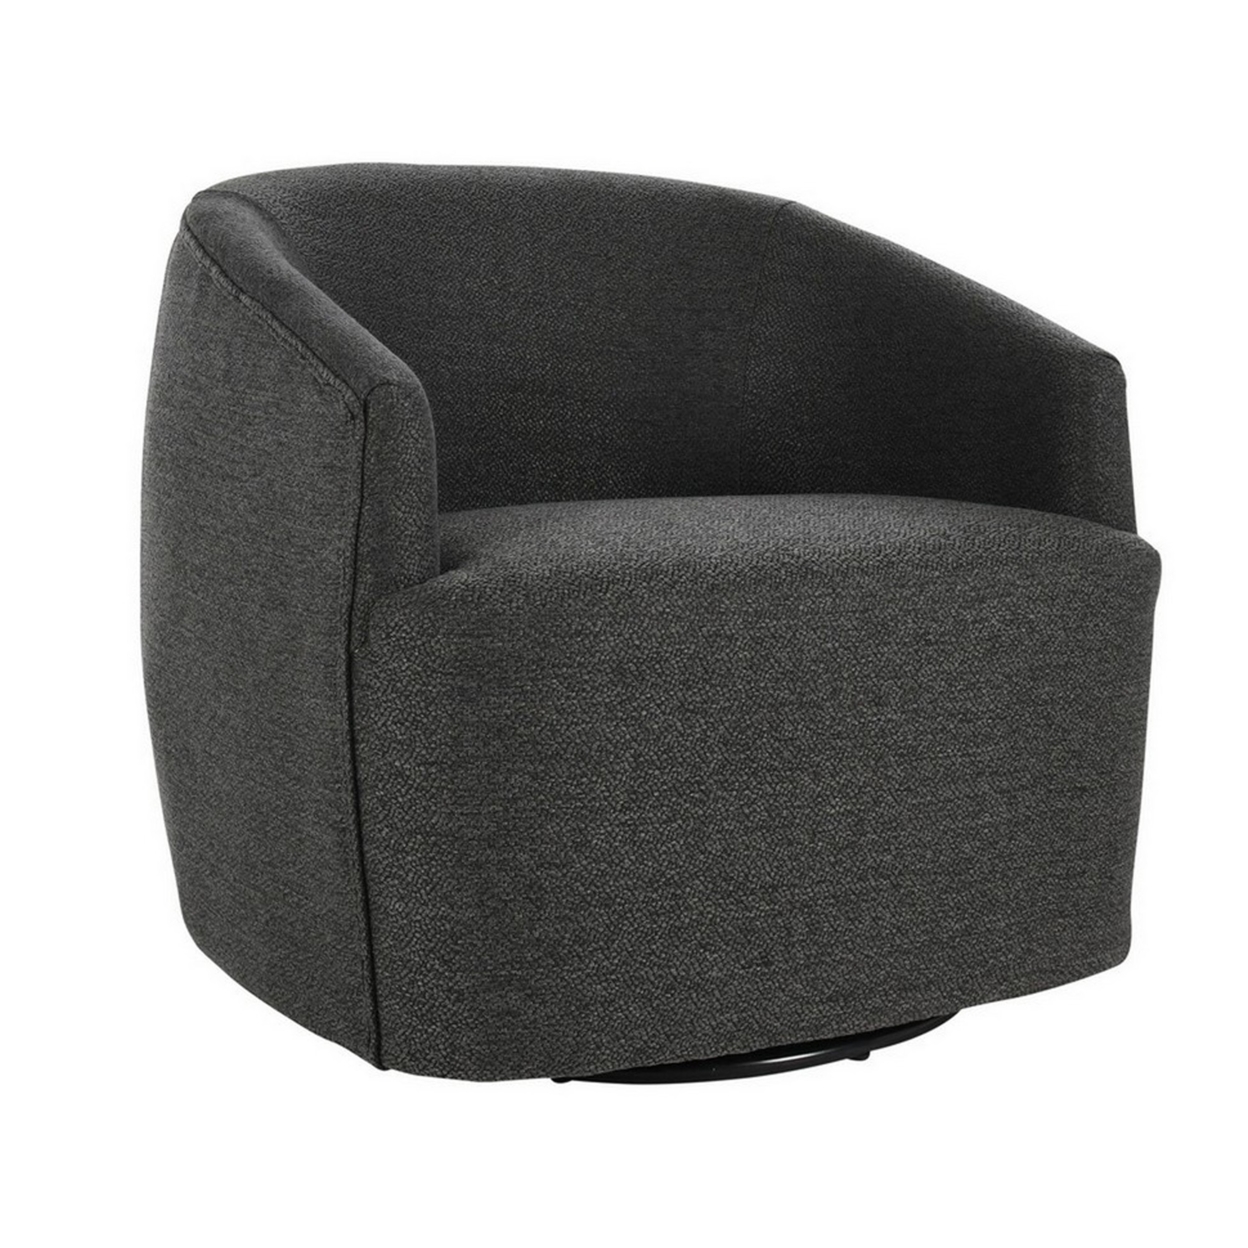 29 Inch Classic Swivel Chair, Curved Back, Sloped Arms, Gray Upholstery- Saltoro Sherpi